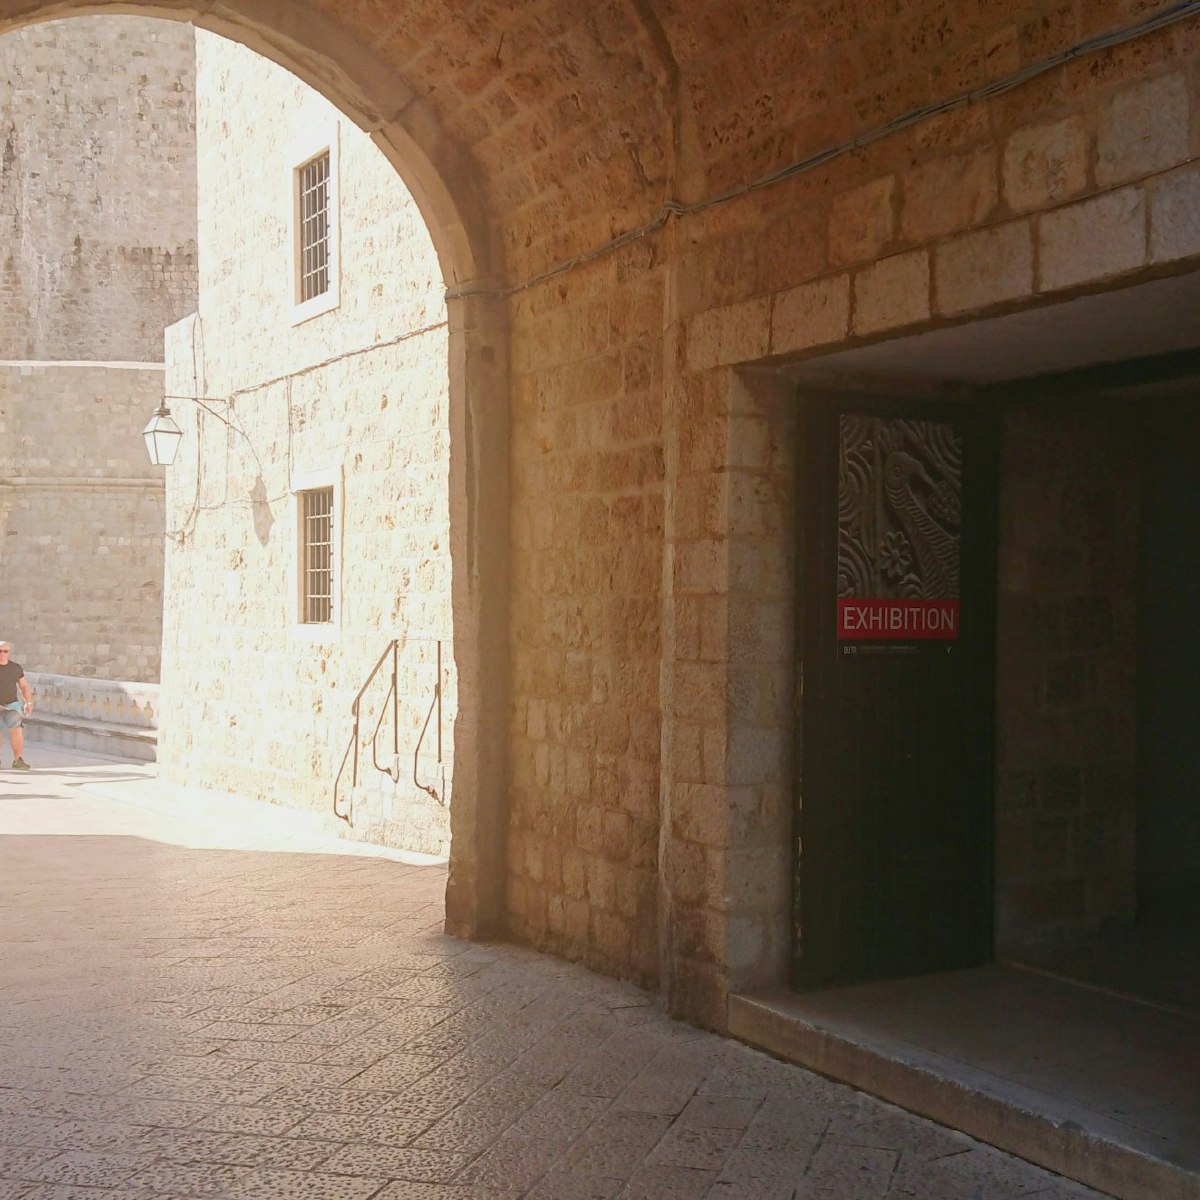 The entrance to the museum sits on Ploče gate